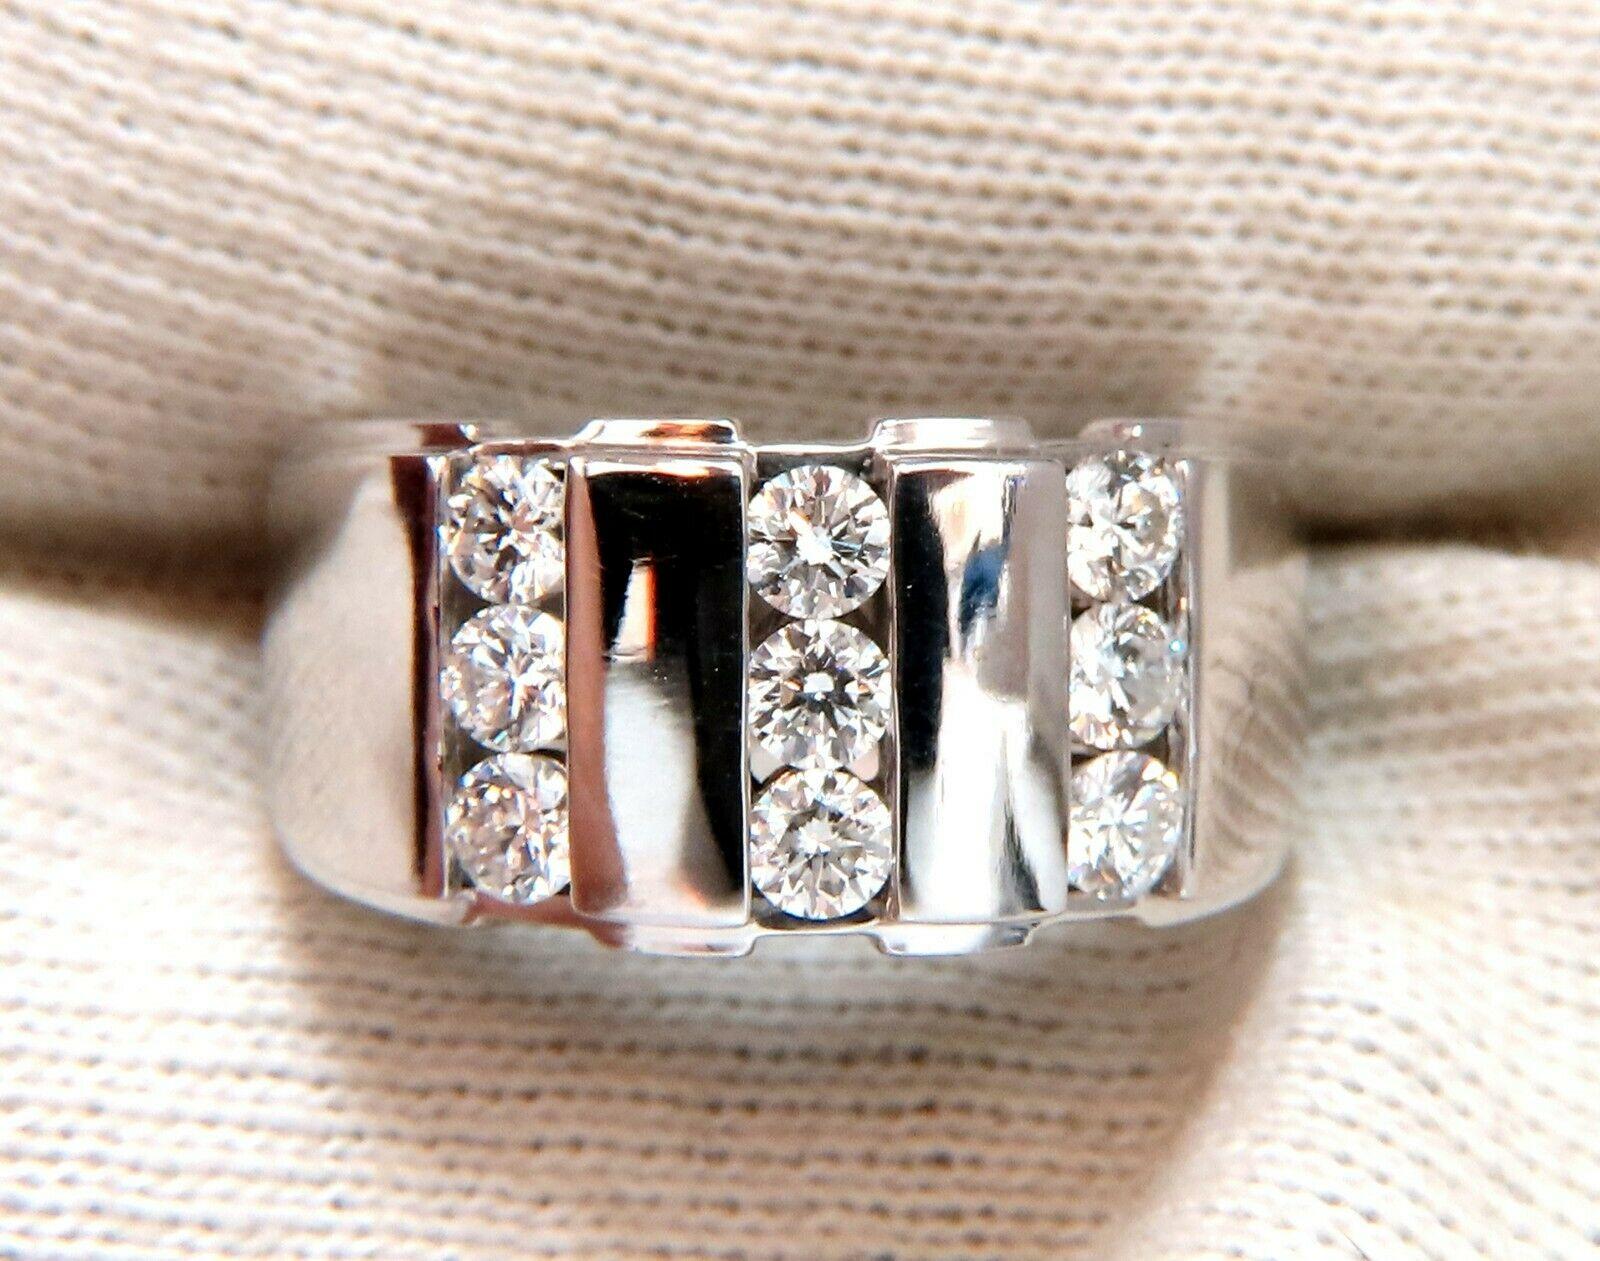 Men's Round cut diamonds Channel (9) band.

1.05ct. natural round cuts, Channel set diamonds.

Vs-2 clarity.

F-G-color

14Kt. White Gold

10.6 grams.

Ring is 10.4mm wide 

current ring size: 7

We may resize, please inquire

Ring is durable,